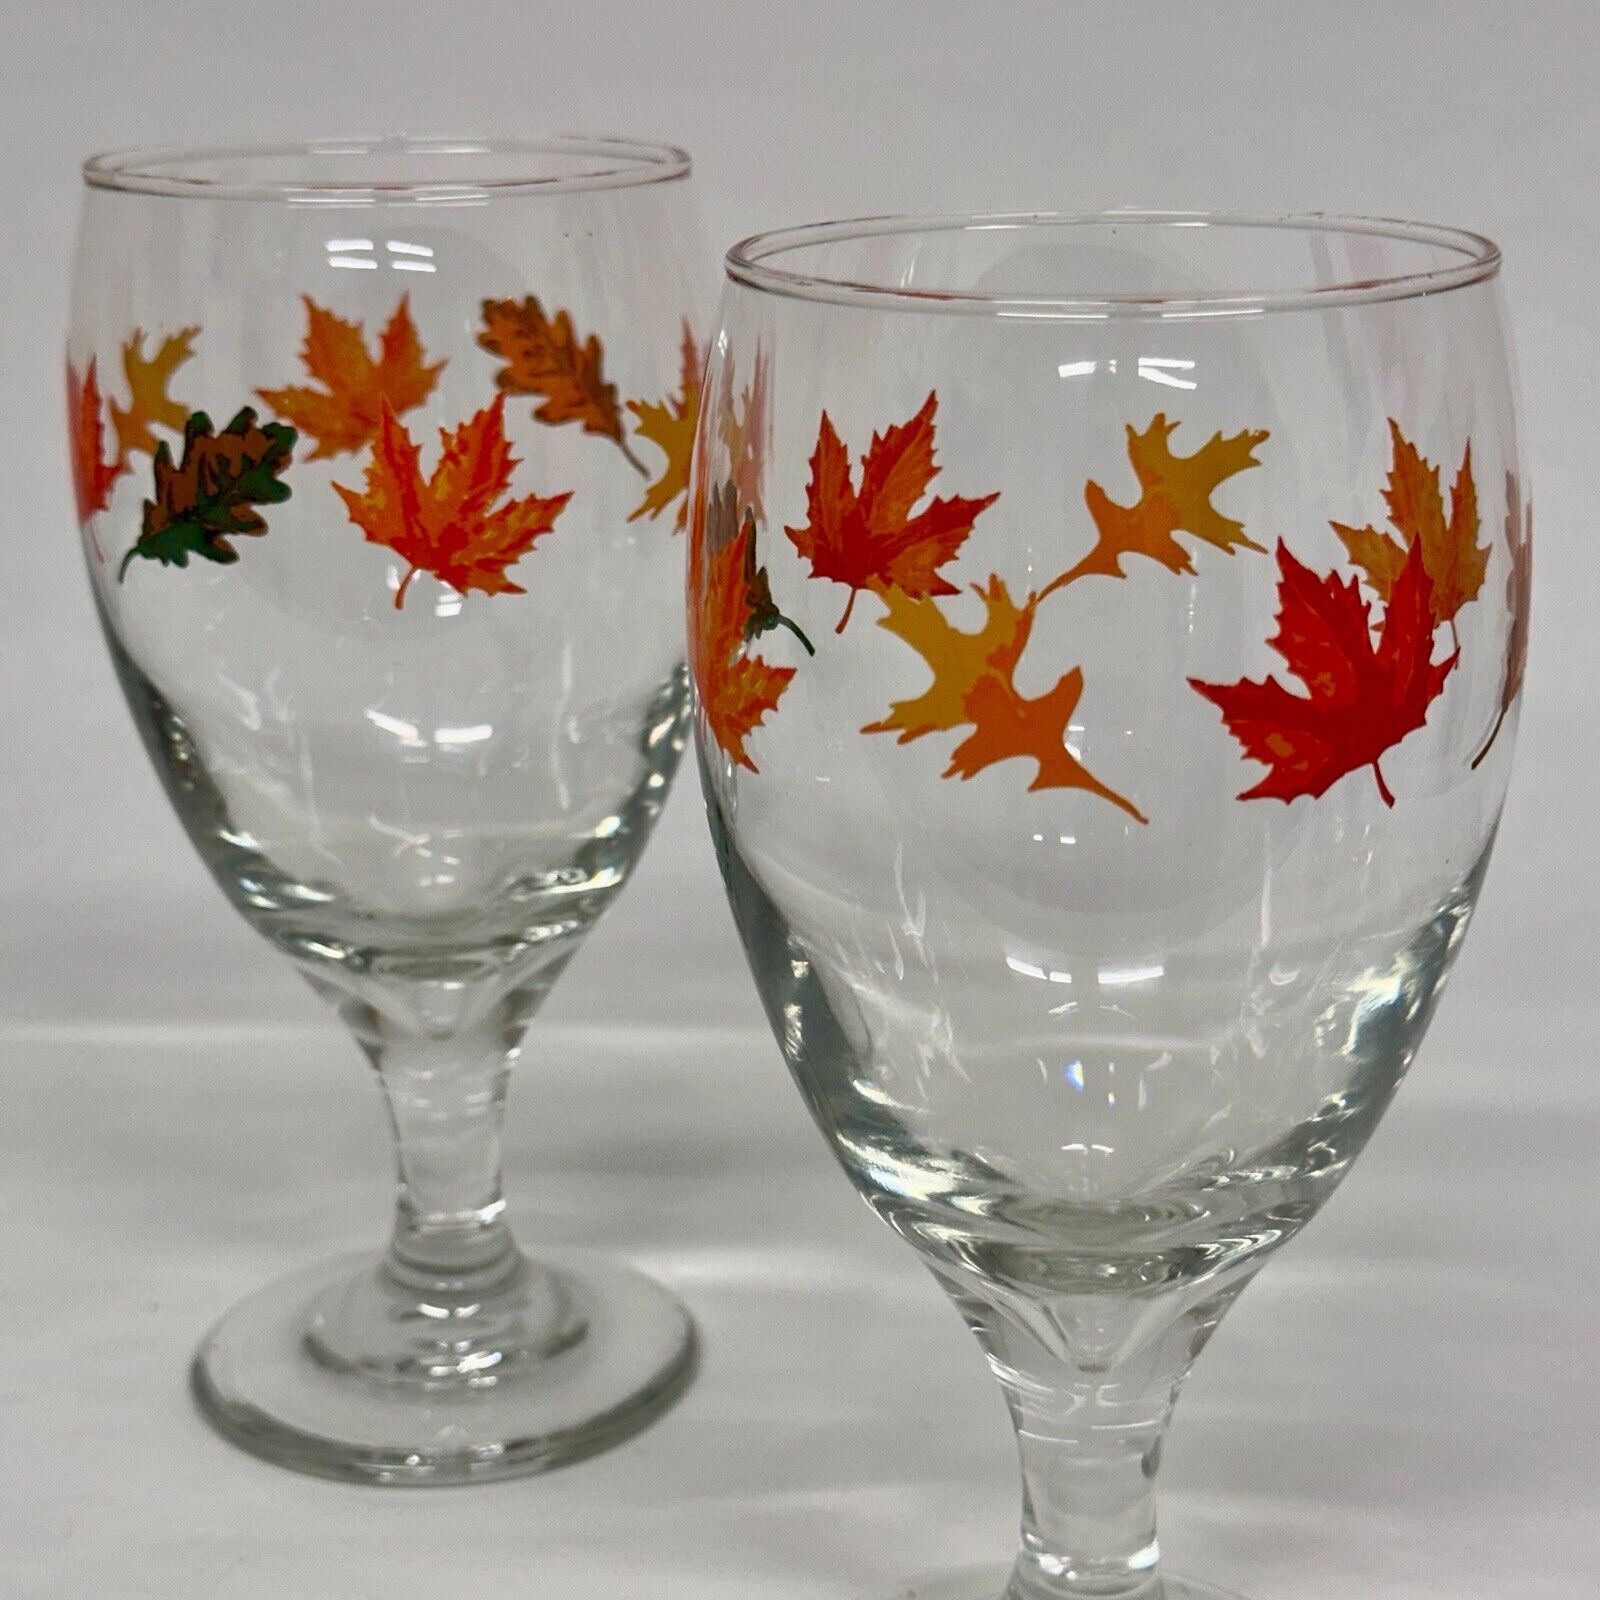 Libbey Glass Water Goblets Wine Ice Tea Fall Autumn Leaves Greenbriar (Set of 2)